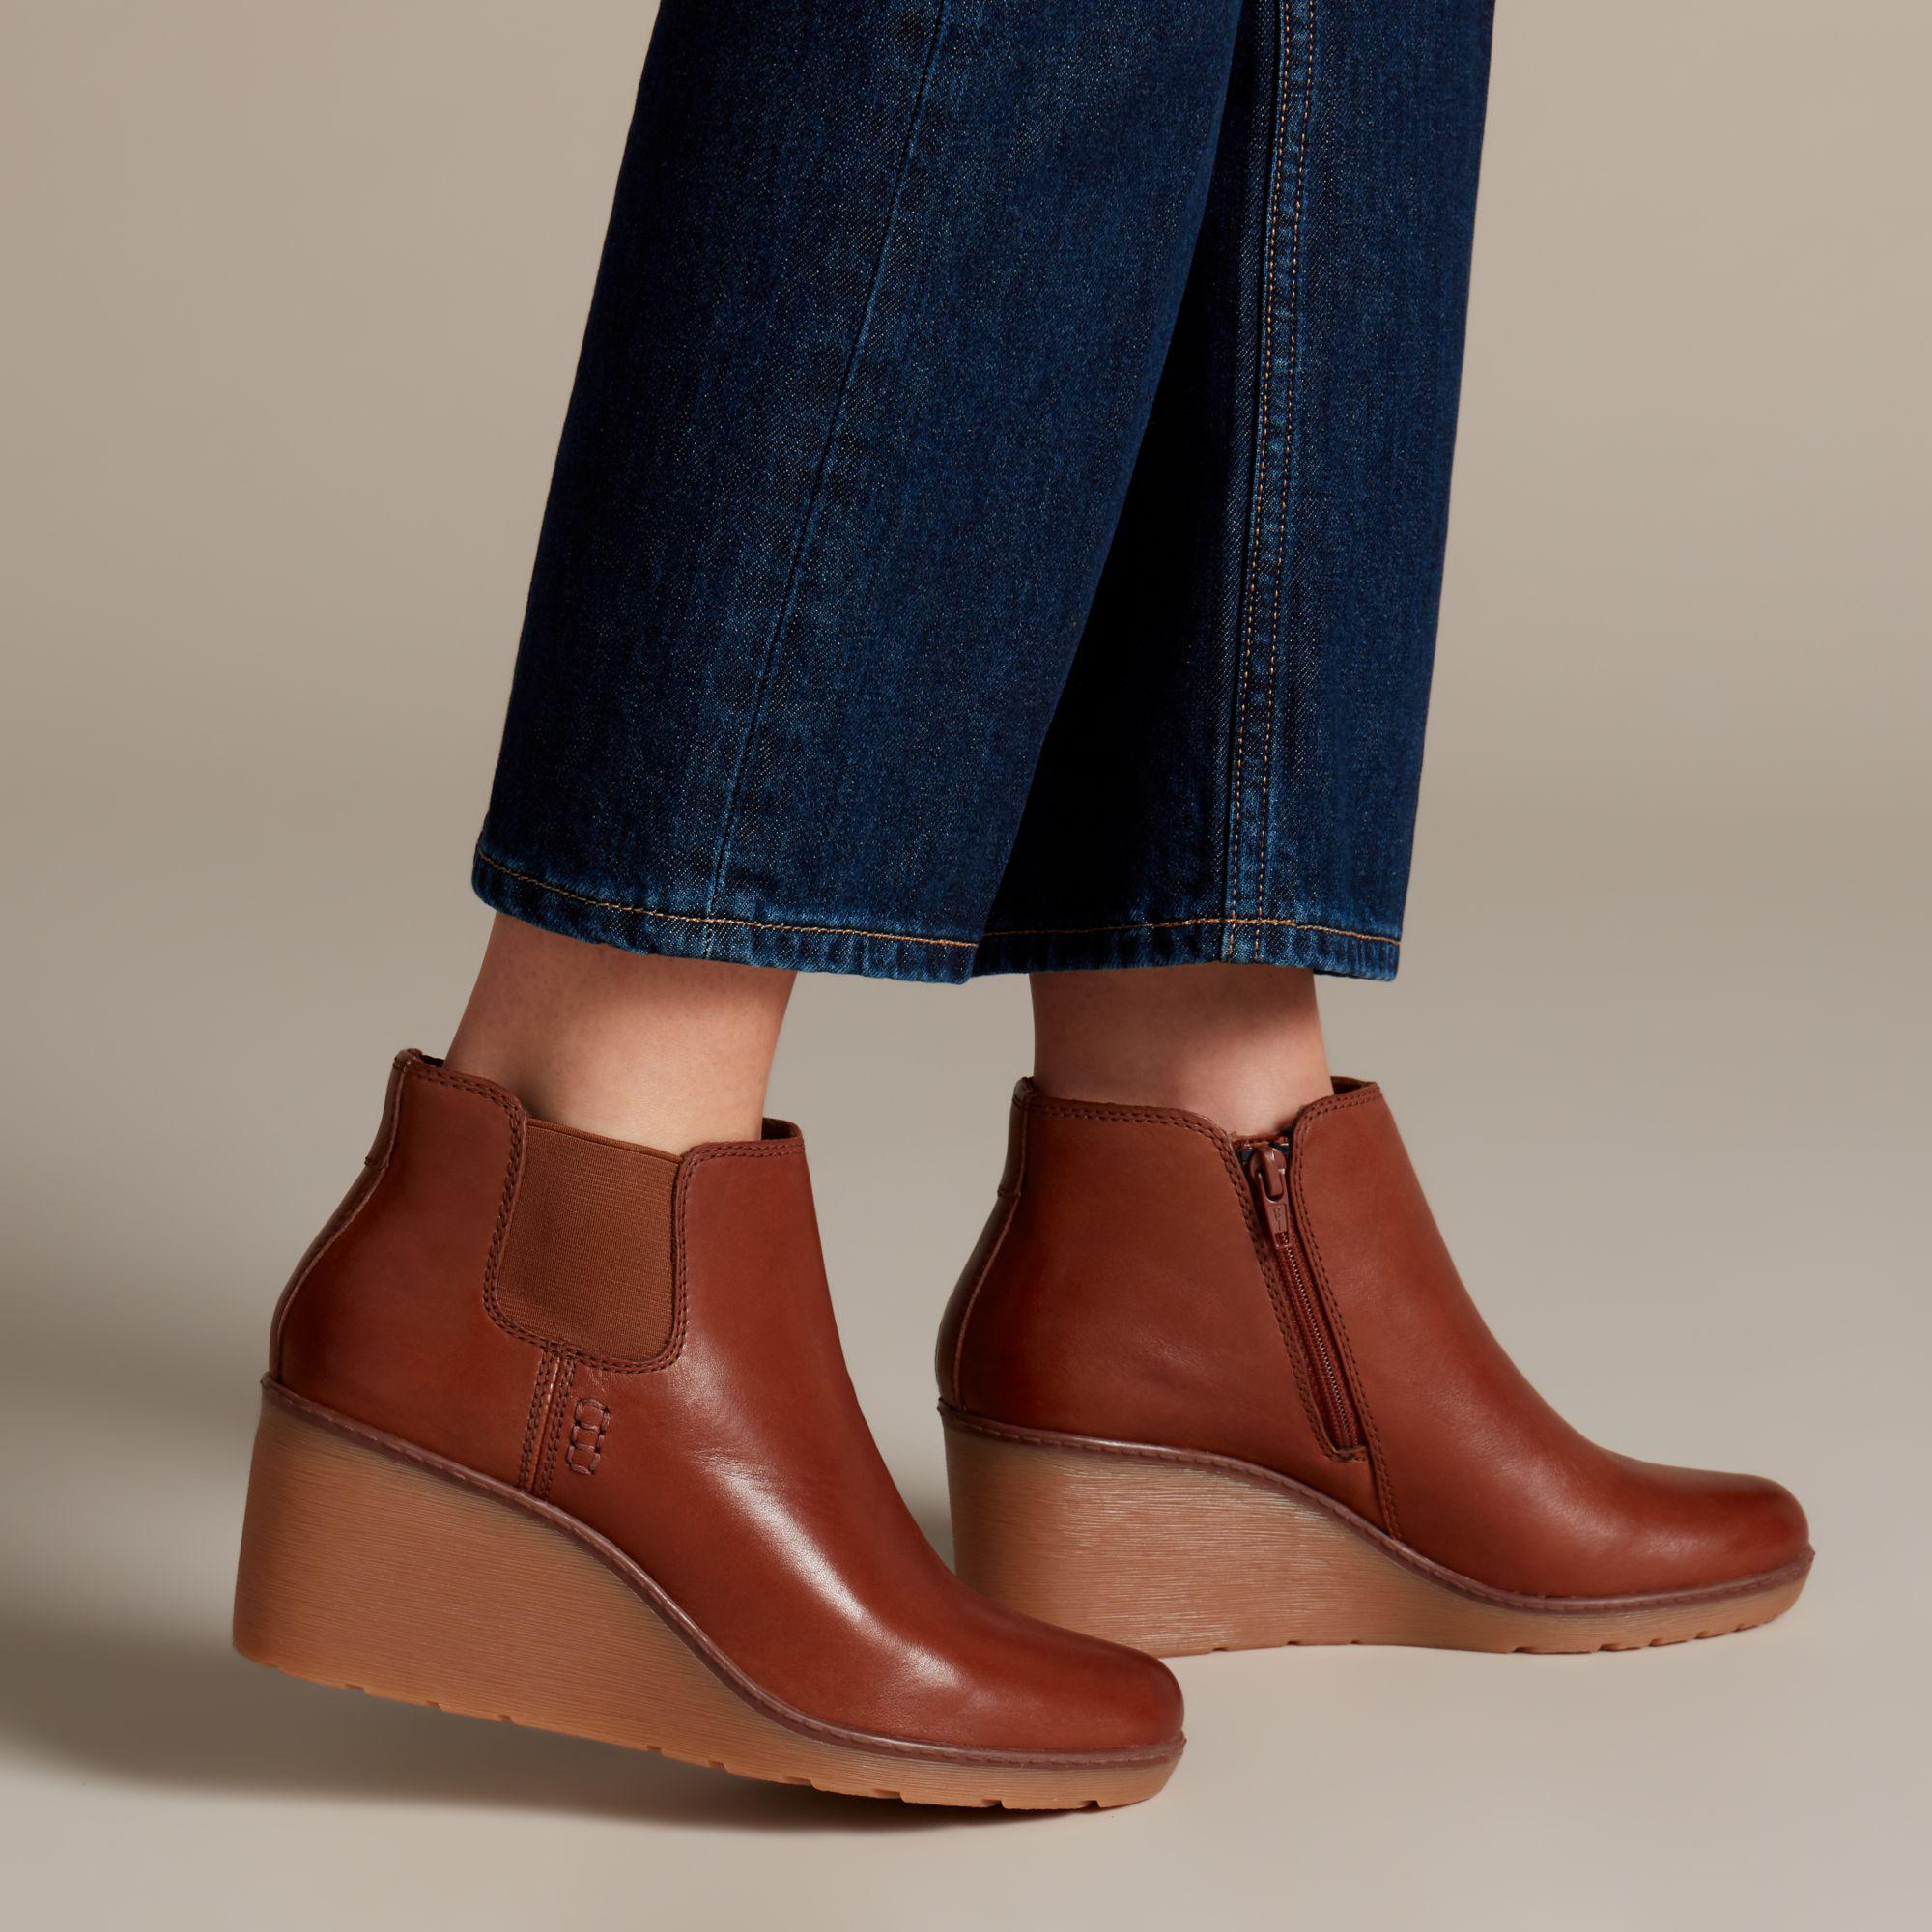 clarks tan wedge boots